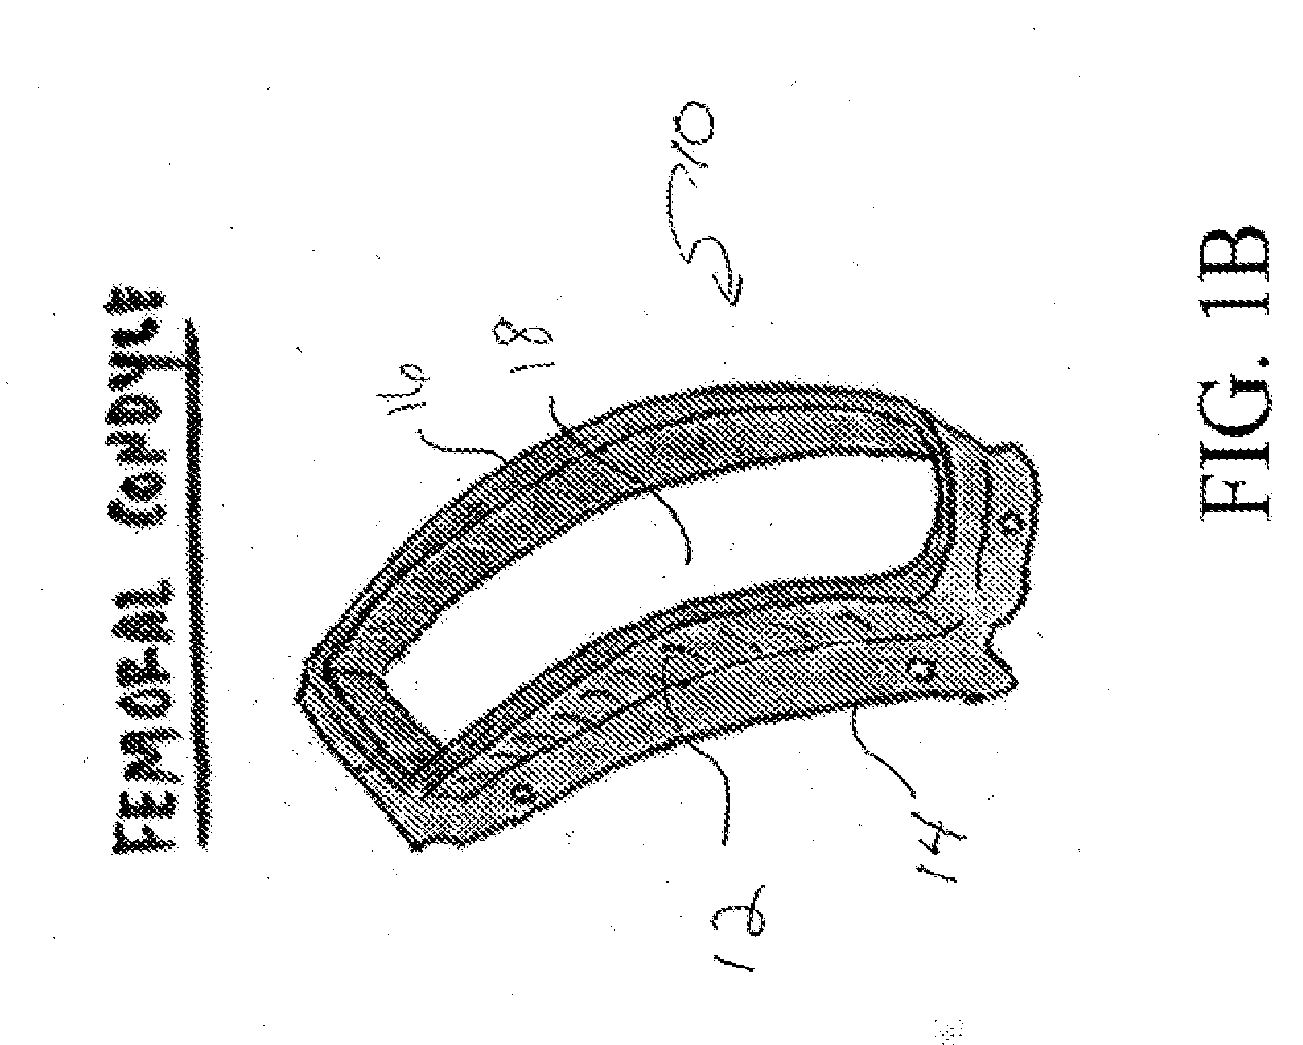 System and method for three dimensional printed implantation guides